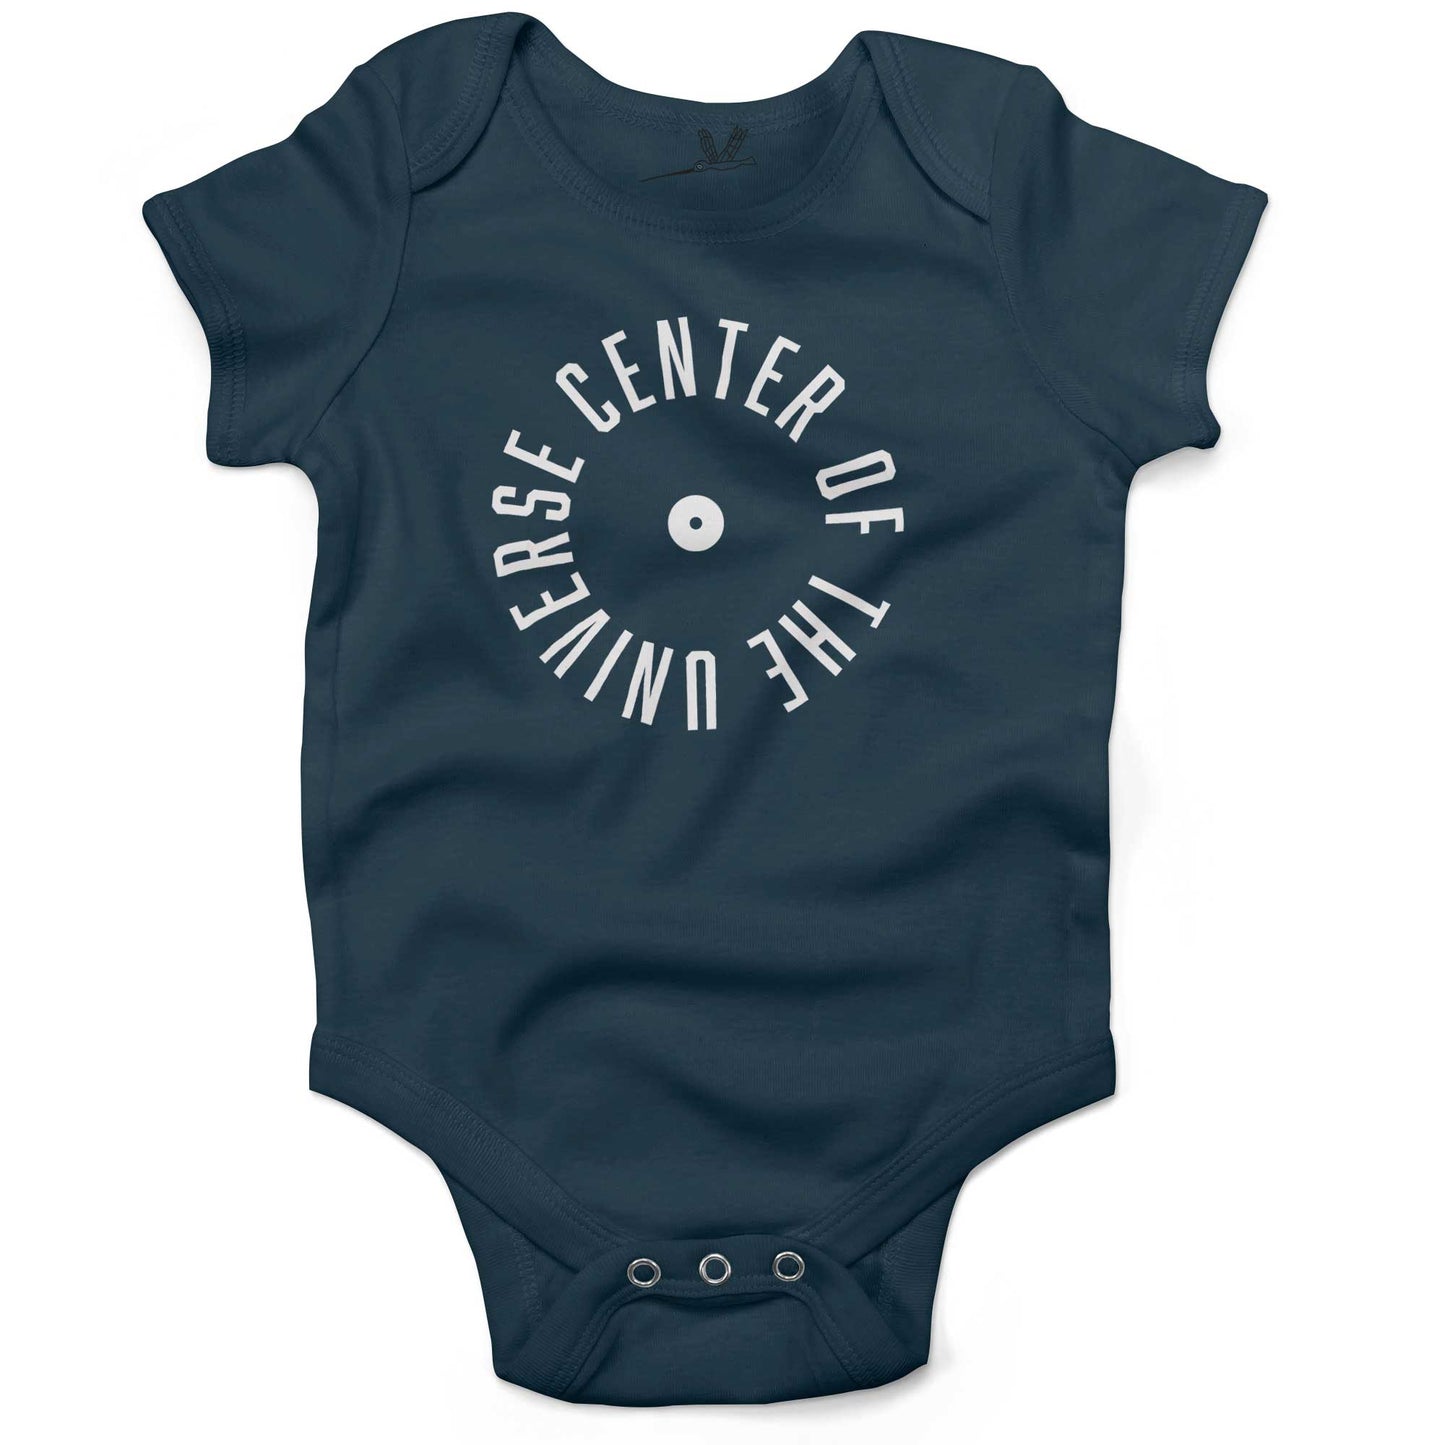 Center Of The Universe Baby One Piece or Raglan Tee-Organic Pacific Blue-3-6 months